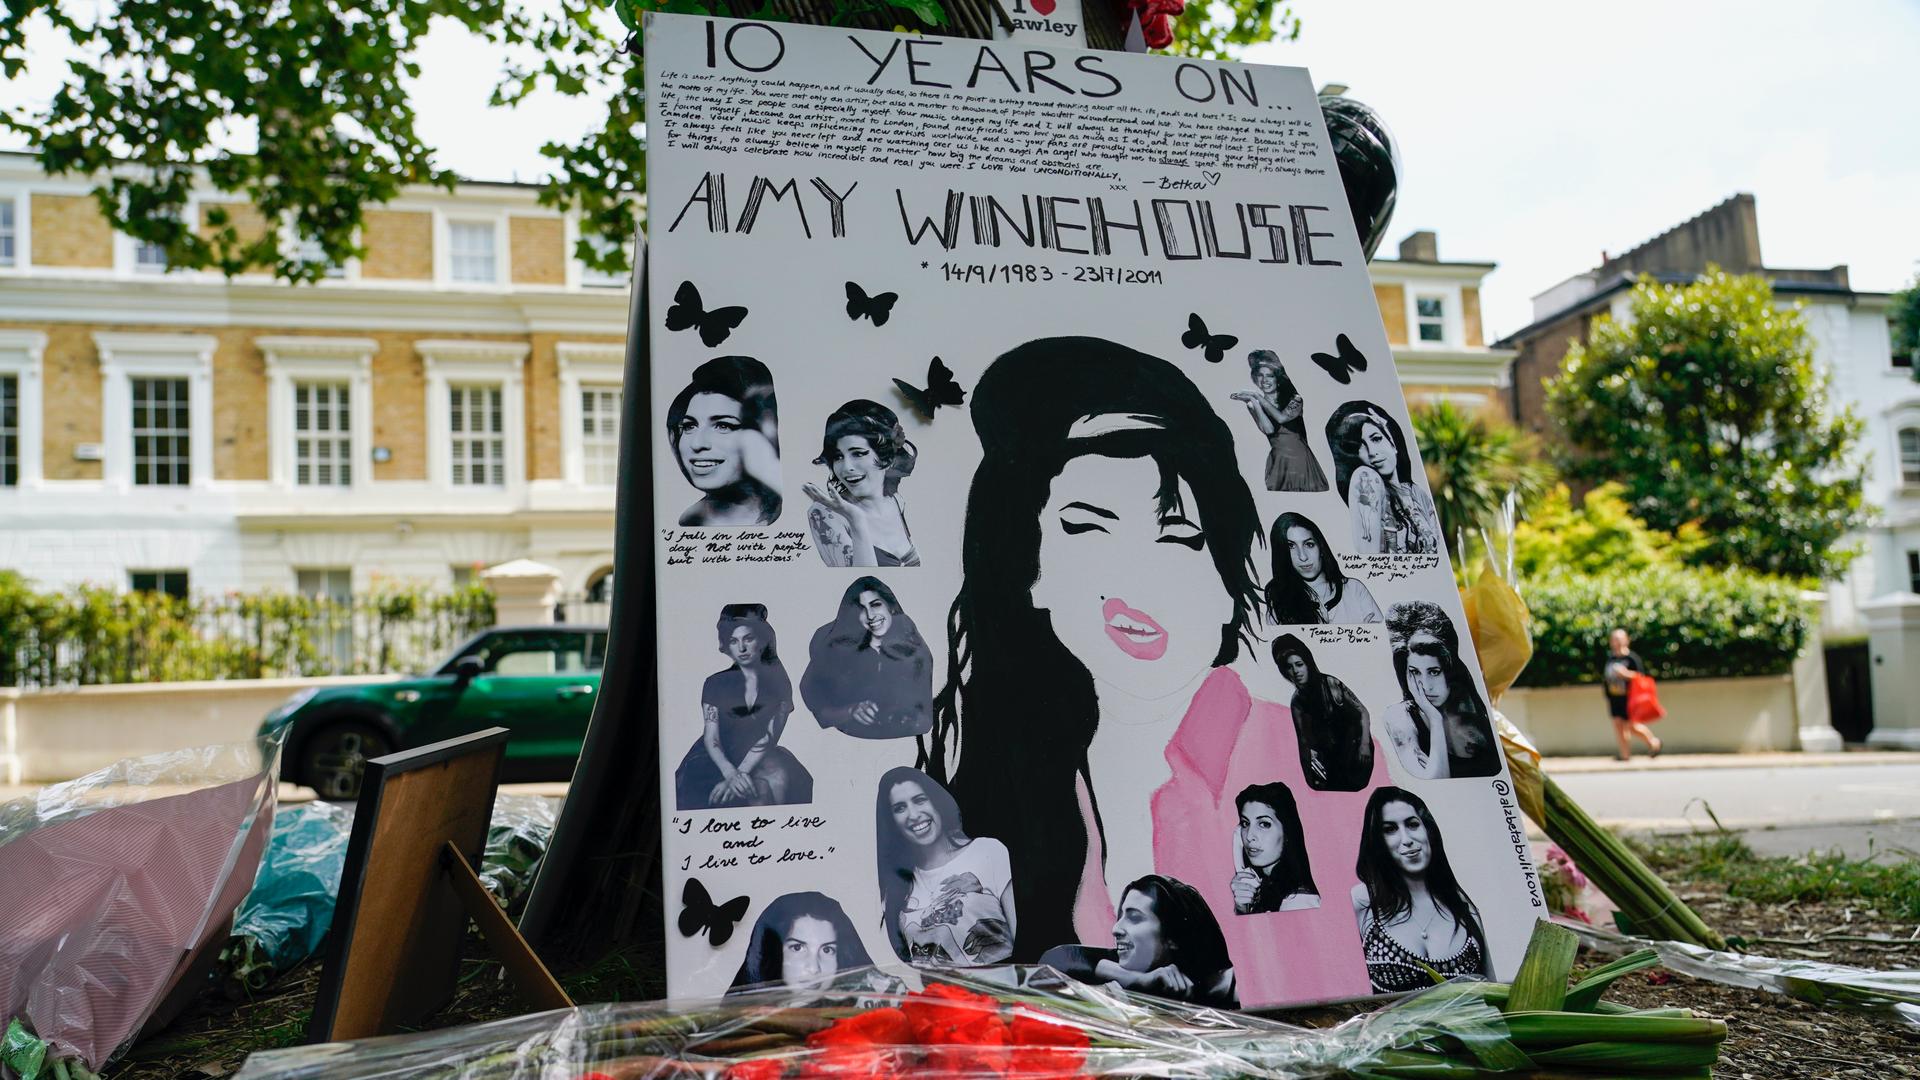 Tributes left outside the former home of Amy Winehouse in Camden, London, Friday, July 23, 2021, on the 10th anniversary of the iconic British singer's death from accidental alcohol poisoning.